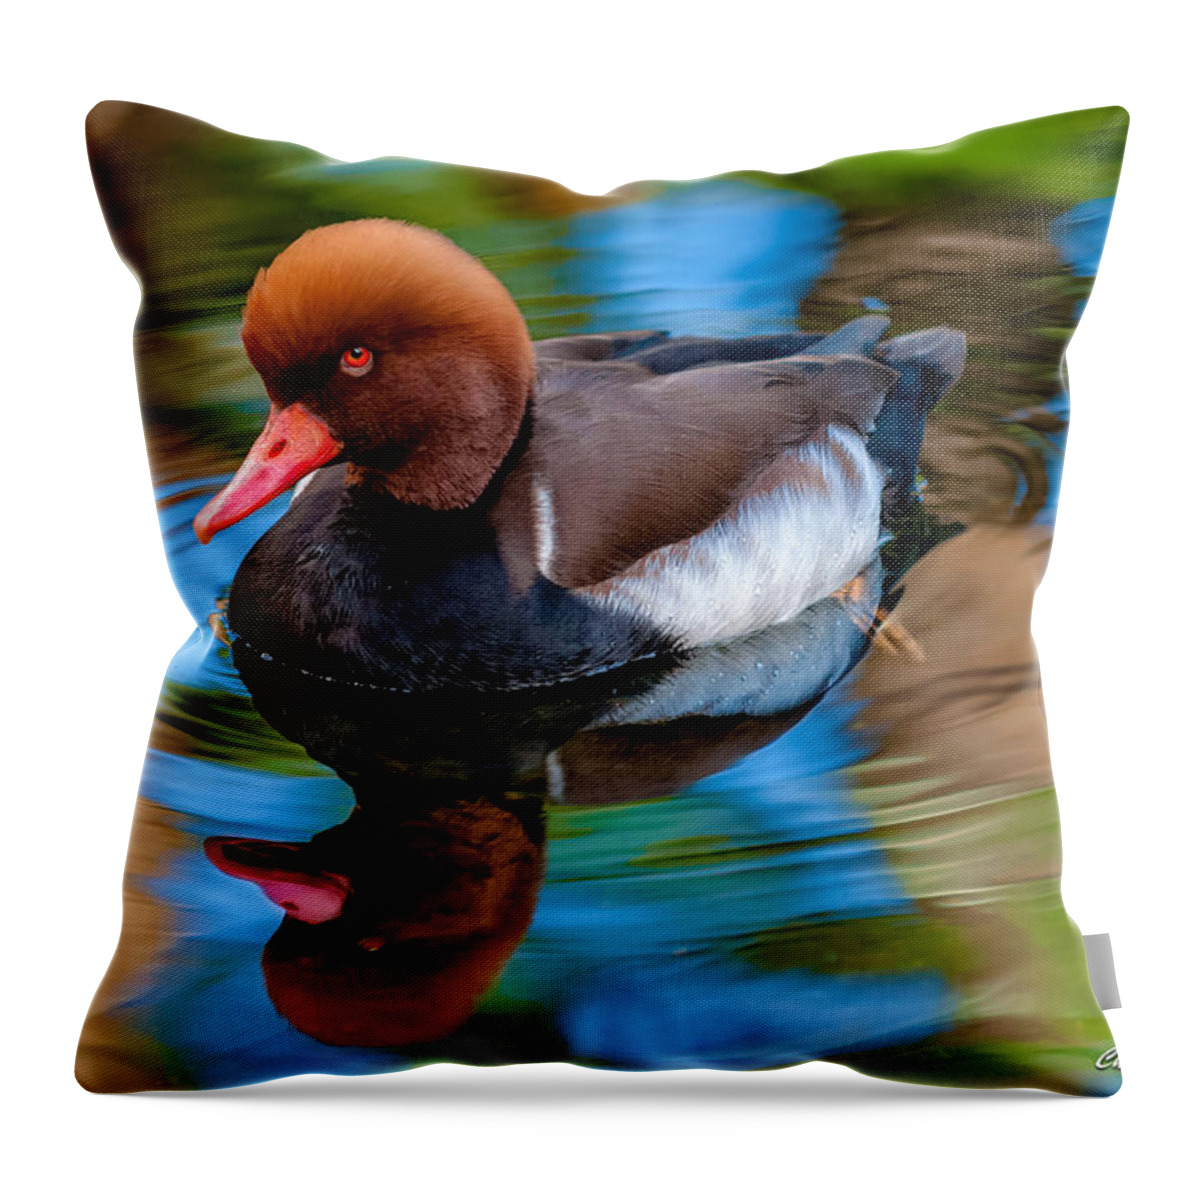 Bird Throw Pillow featuring the photograph Resting In Pool Of Colors by Christopher Holmes